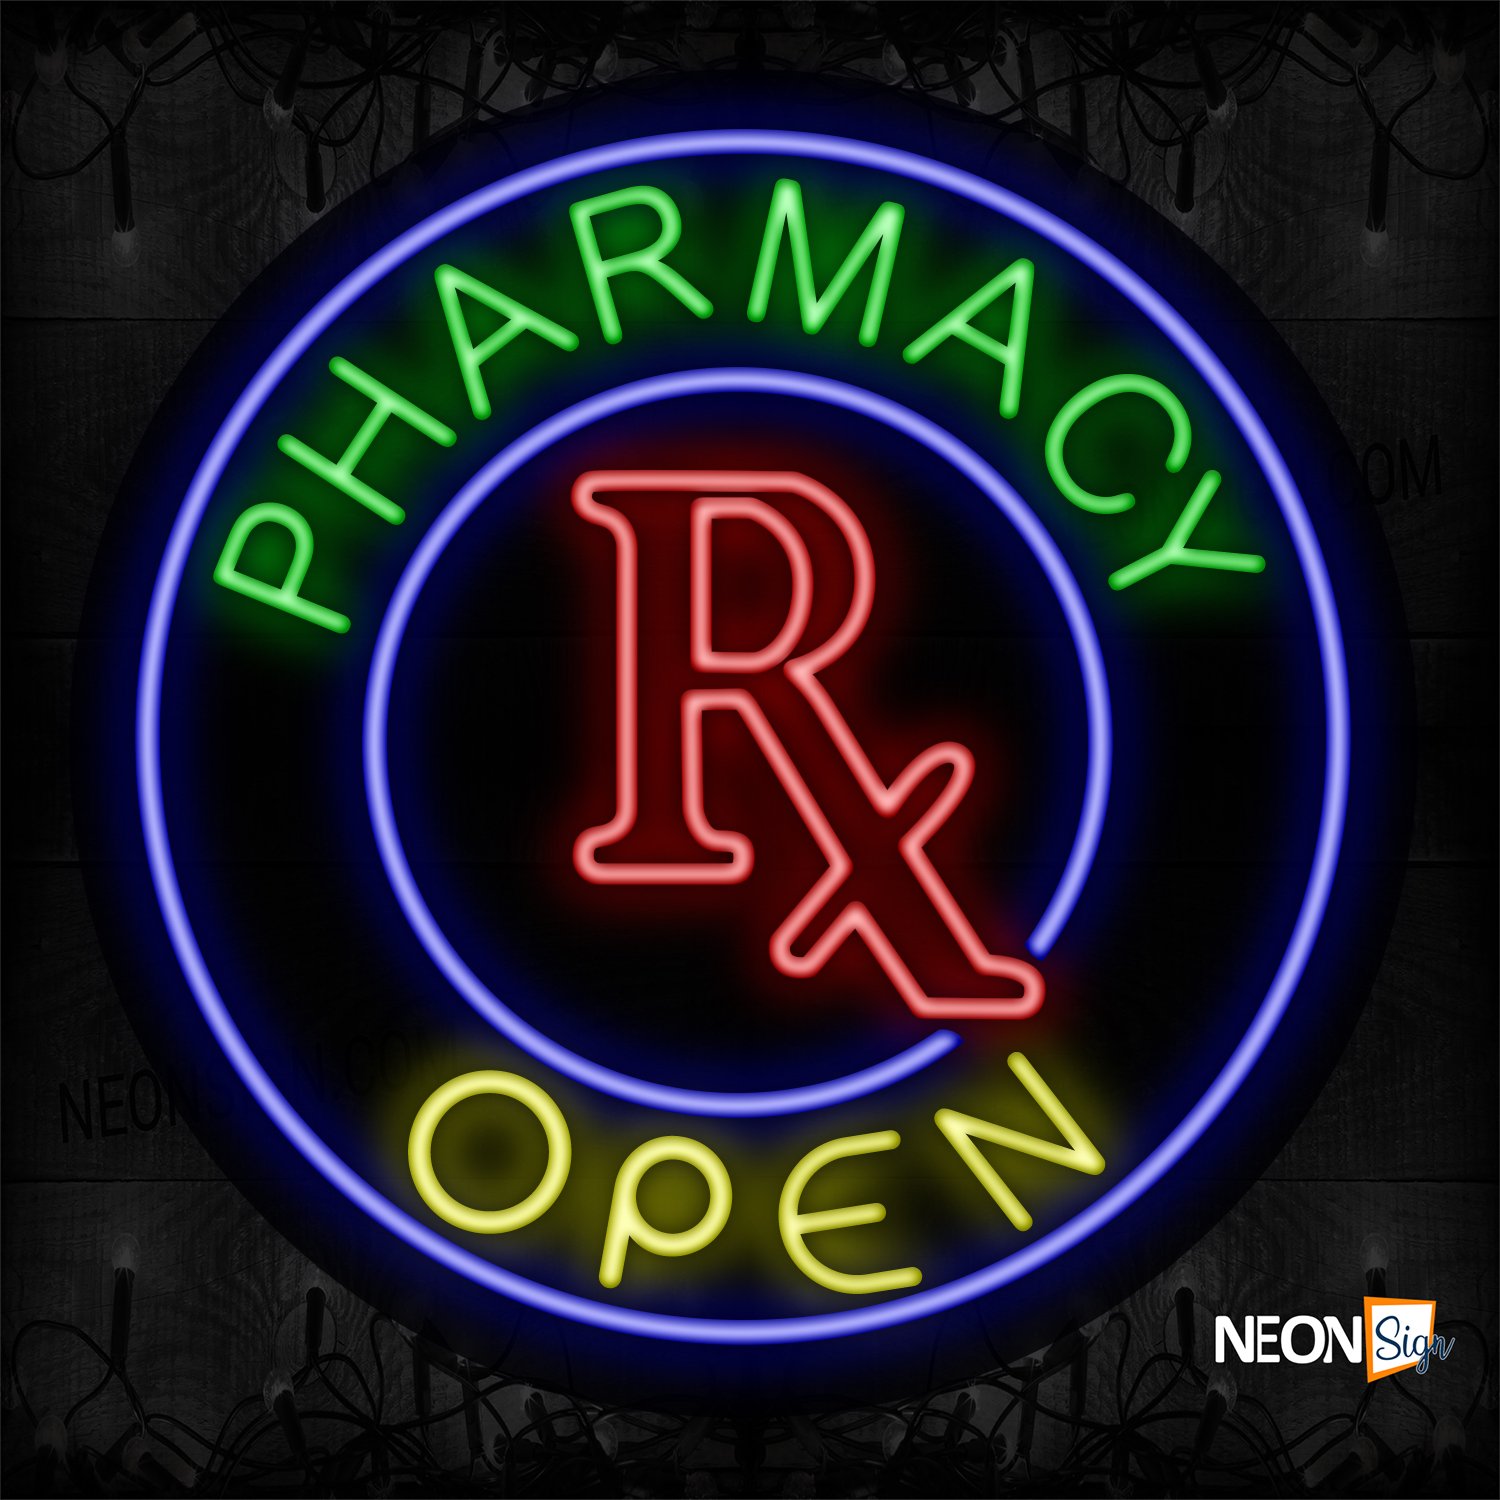 Image of 11333 Pharmacy Rx Open With Circle Border Neon Sign_26x26 Contoured Black Backing